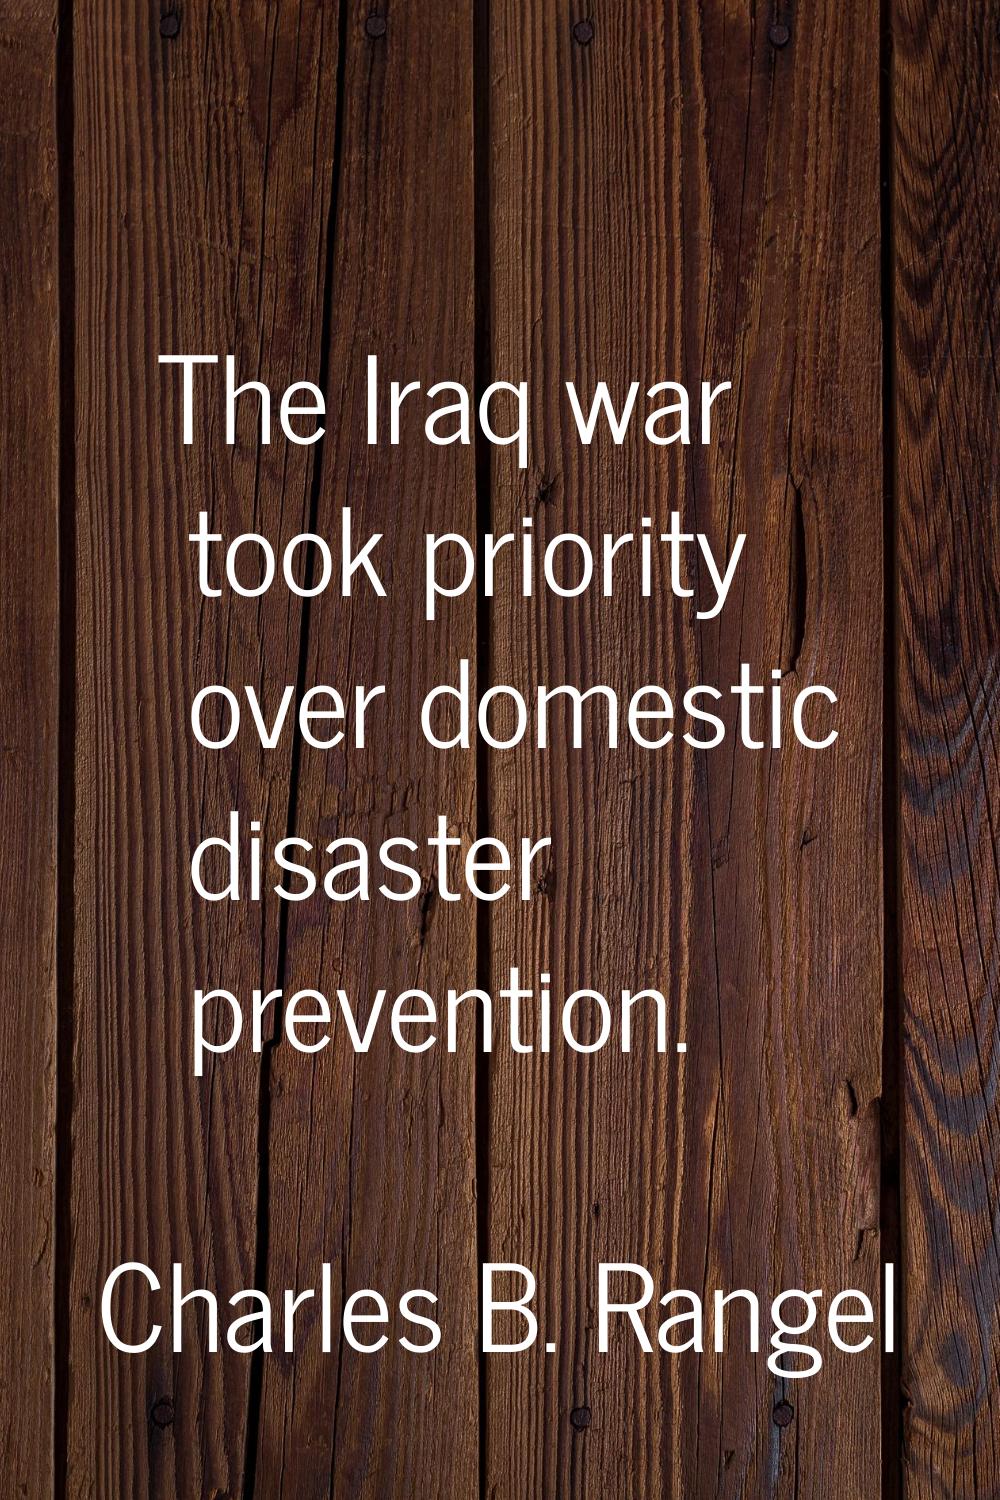 The Iraq war took priority over domestic disaster prevention.